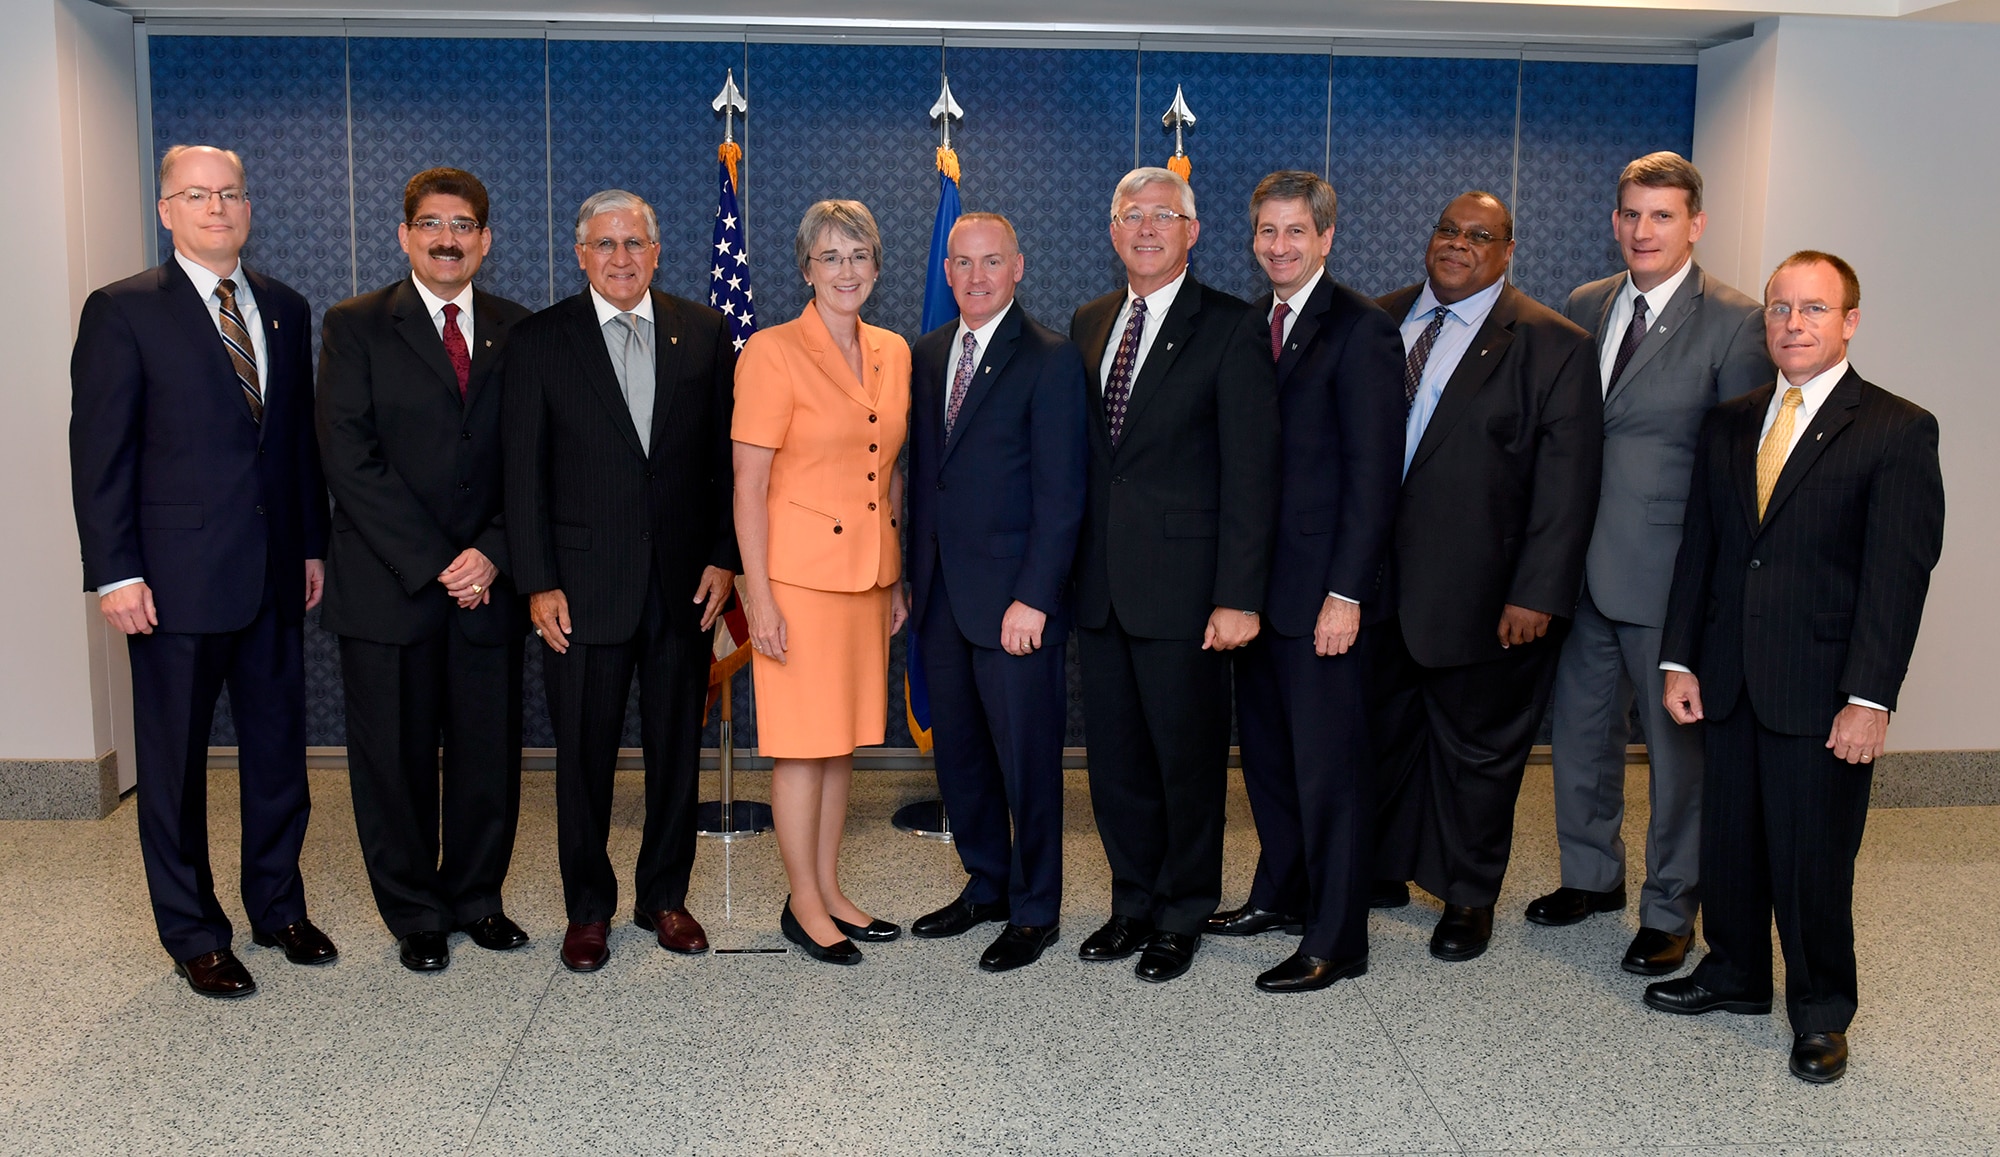 Secretary of the Air Force Heather Wilson (center) stands with the 2016 Presidential Rank Award recipients after a ceremony held at the Pentagon, Washington D.C., July 14, 2017. The award is limited each year to only 1 percent of the Air Force’s senior executives and only 5 percent of Senior Executive Service employees may receive the Presidential Meritorious Rank Award. (U.S. Air Force photo/Wayne A. Clark)